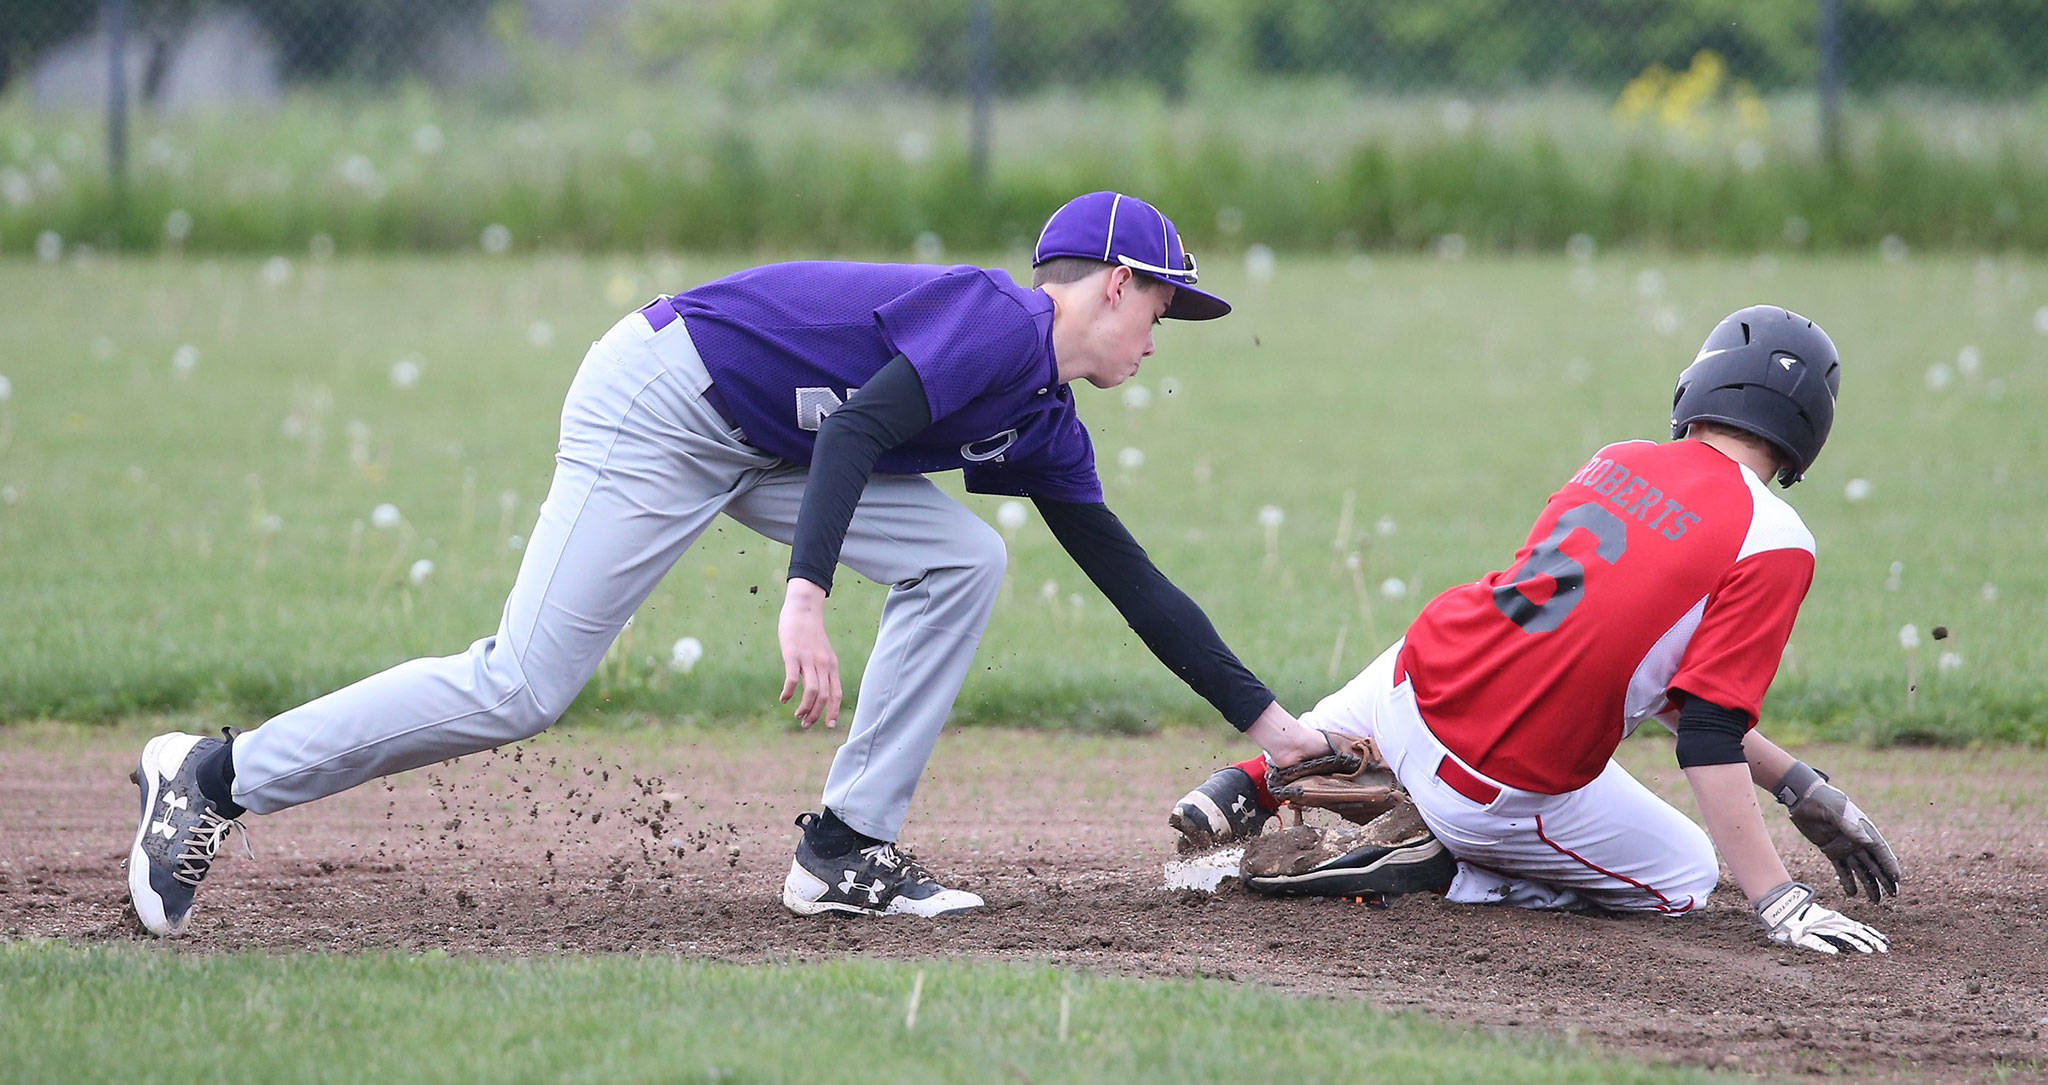 Coupeville’s Cody Roberts steals second base ahead of a tag by Gage McLeod. (Photo by John Fisken)